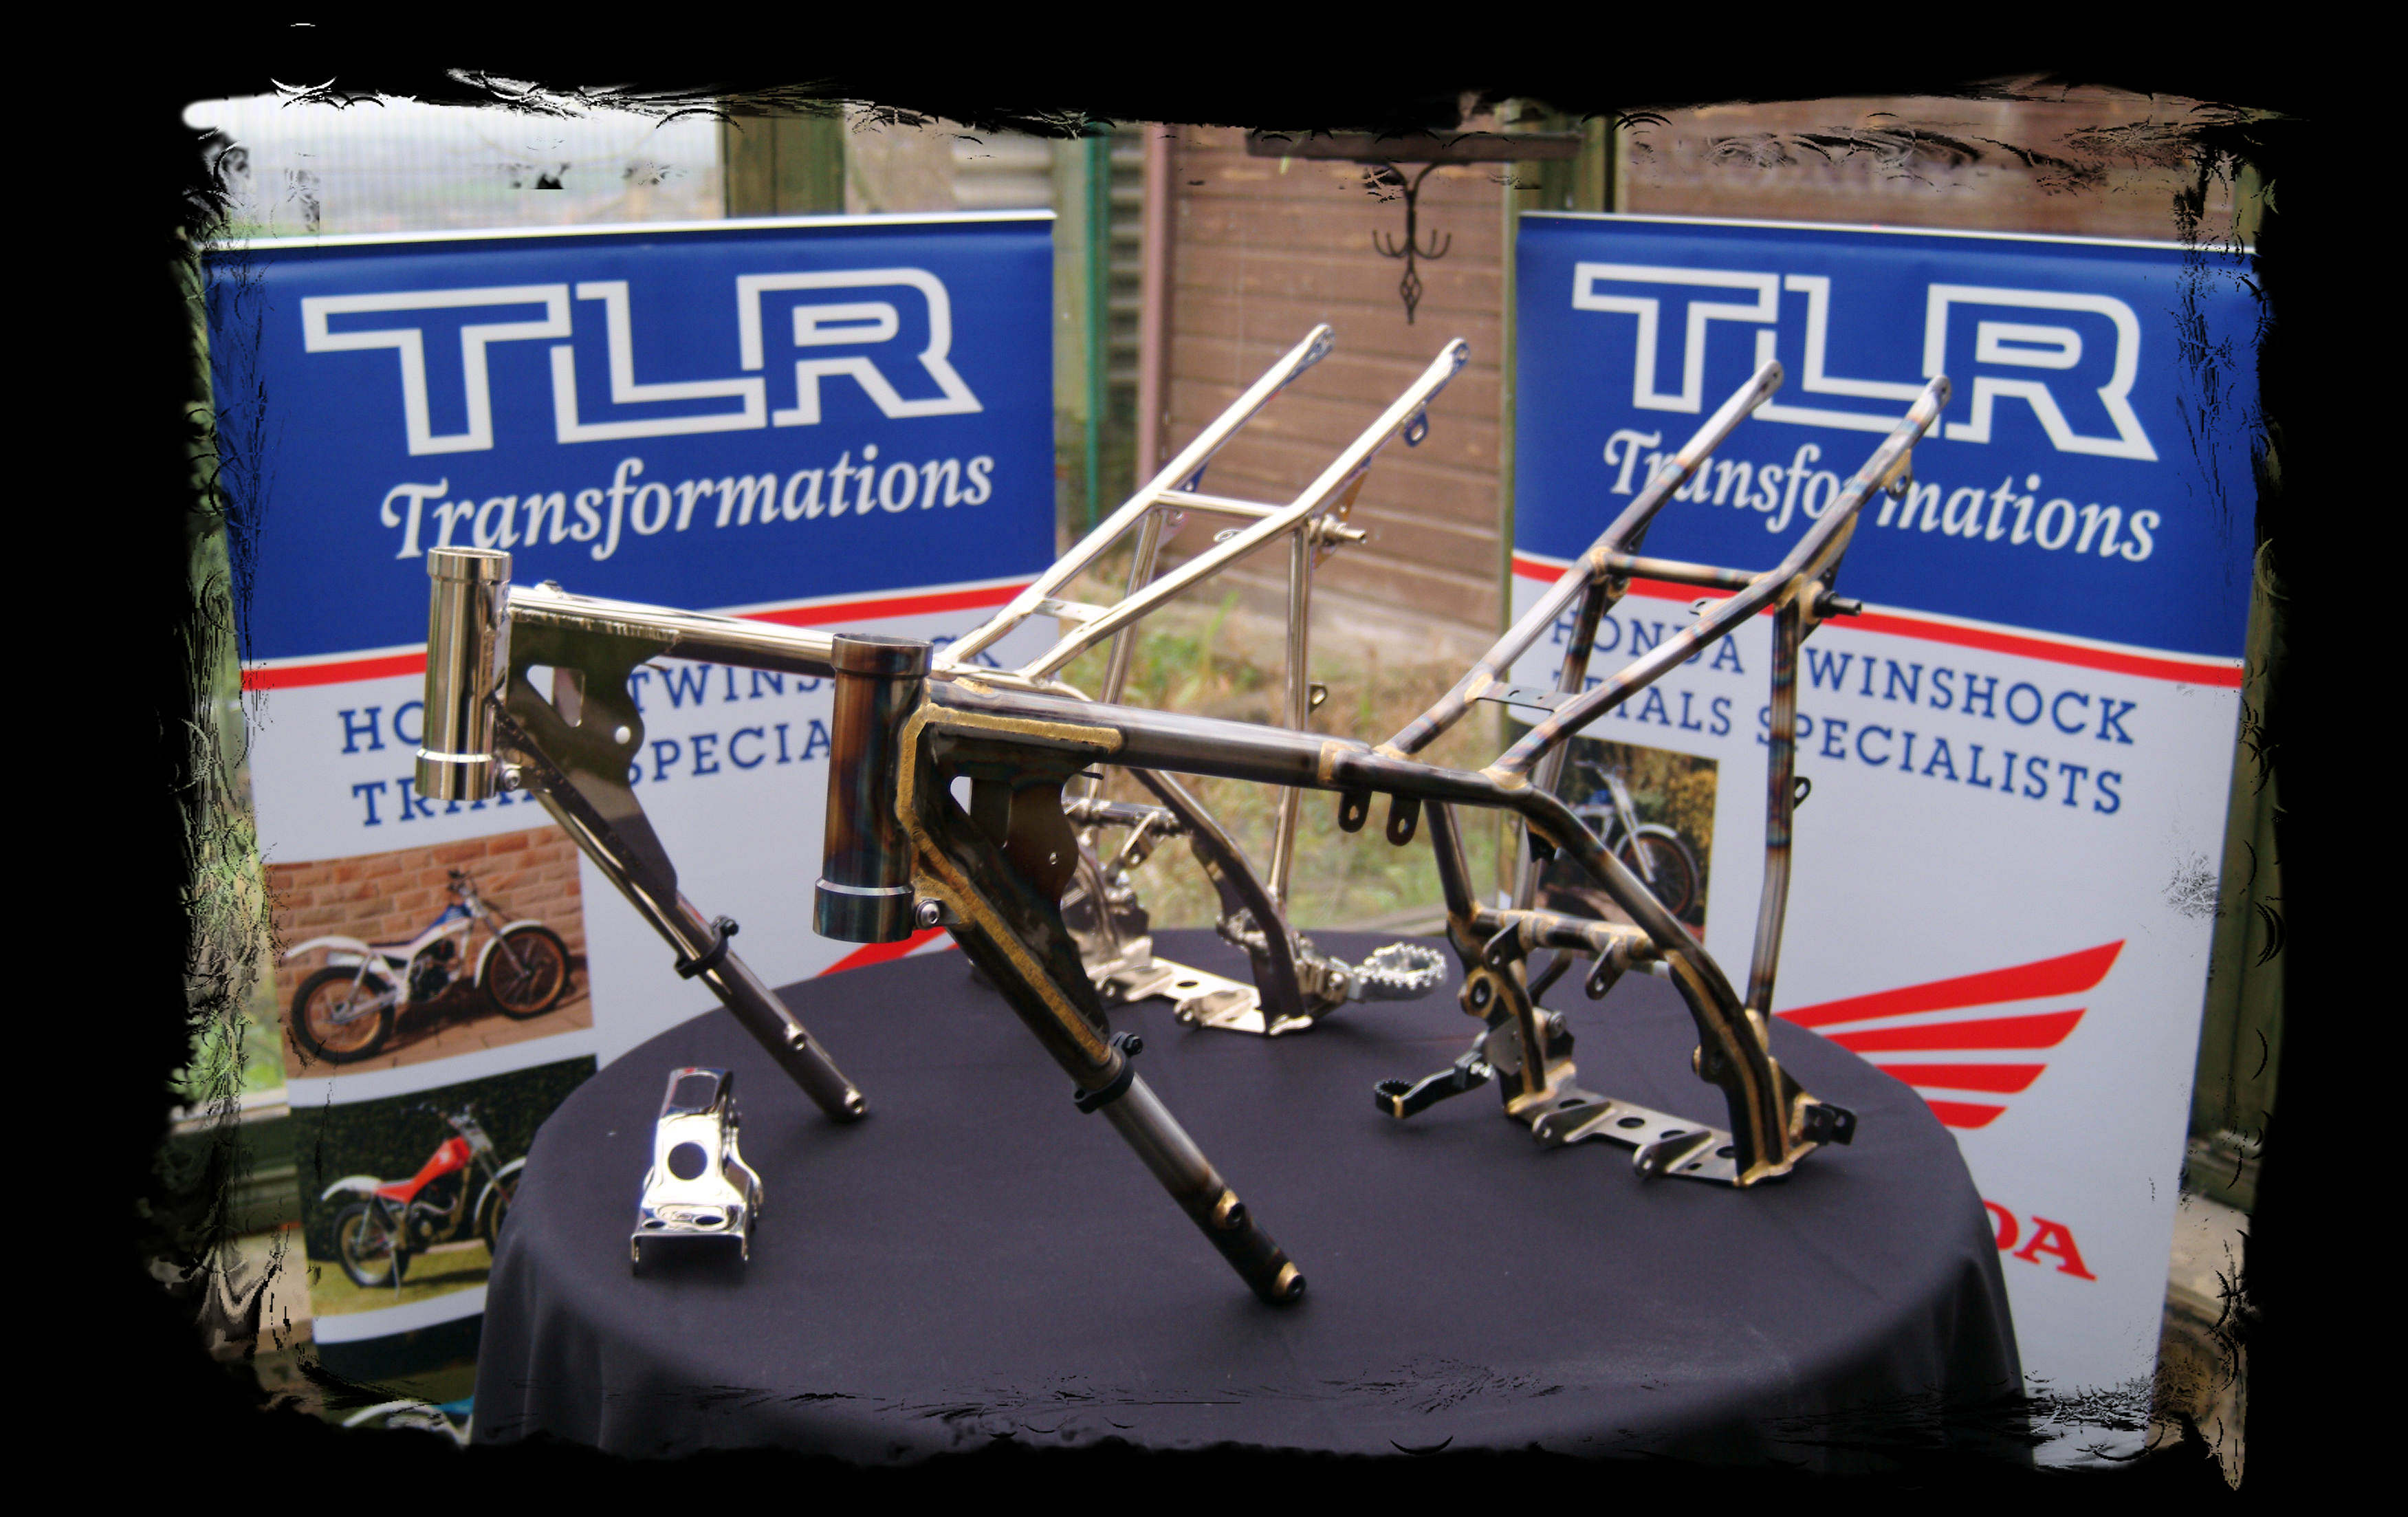 TLR chassis